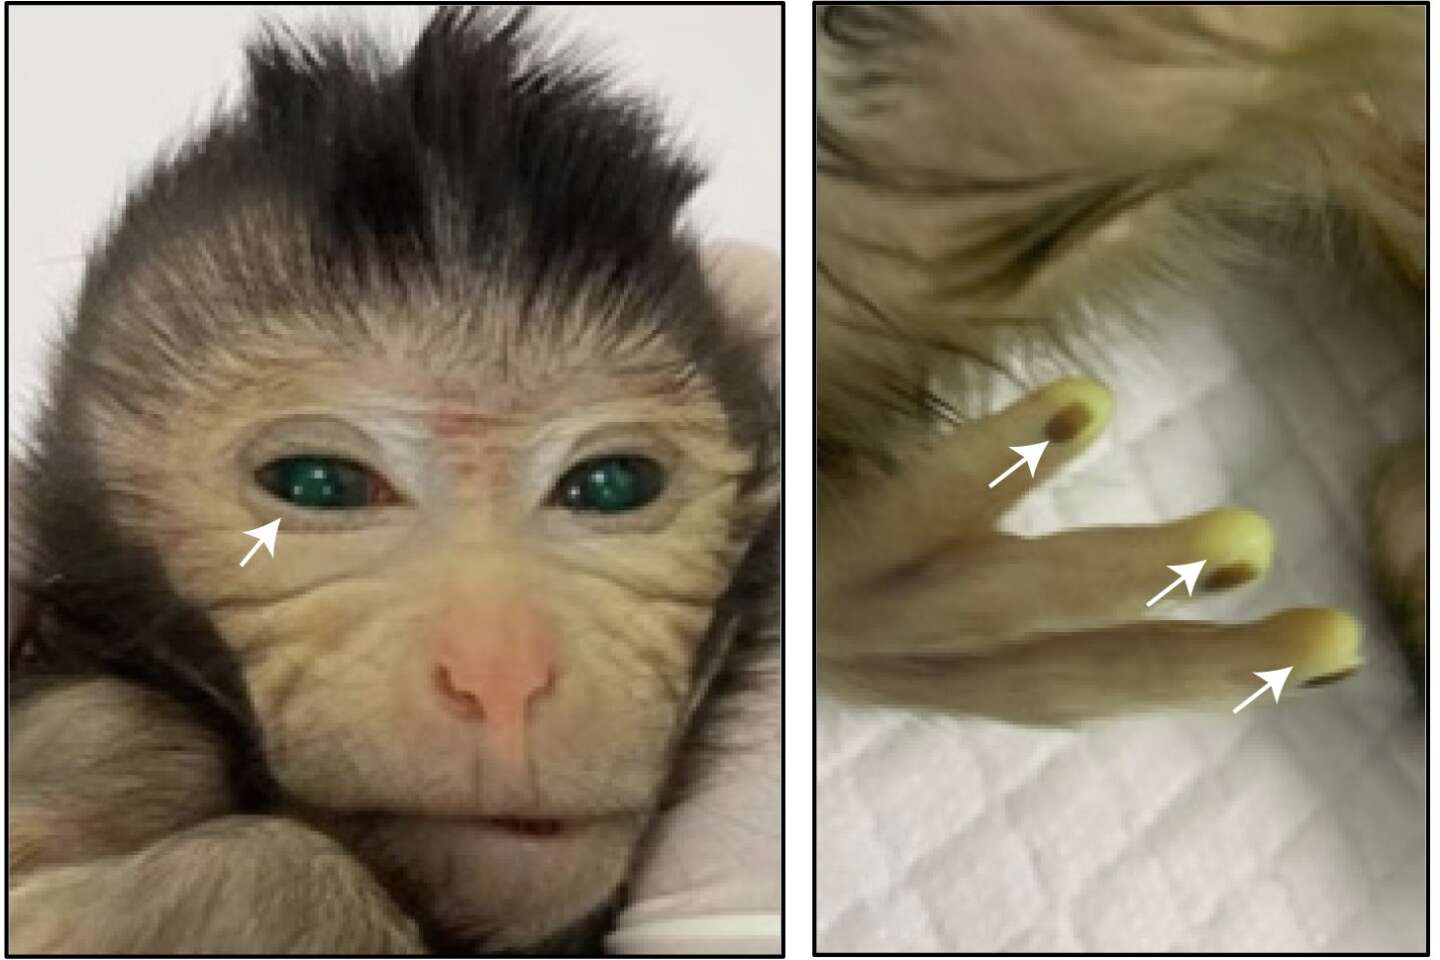 A fictional monkey was born in a Chinese laboratory